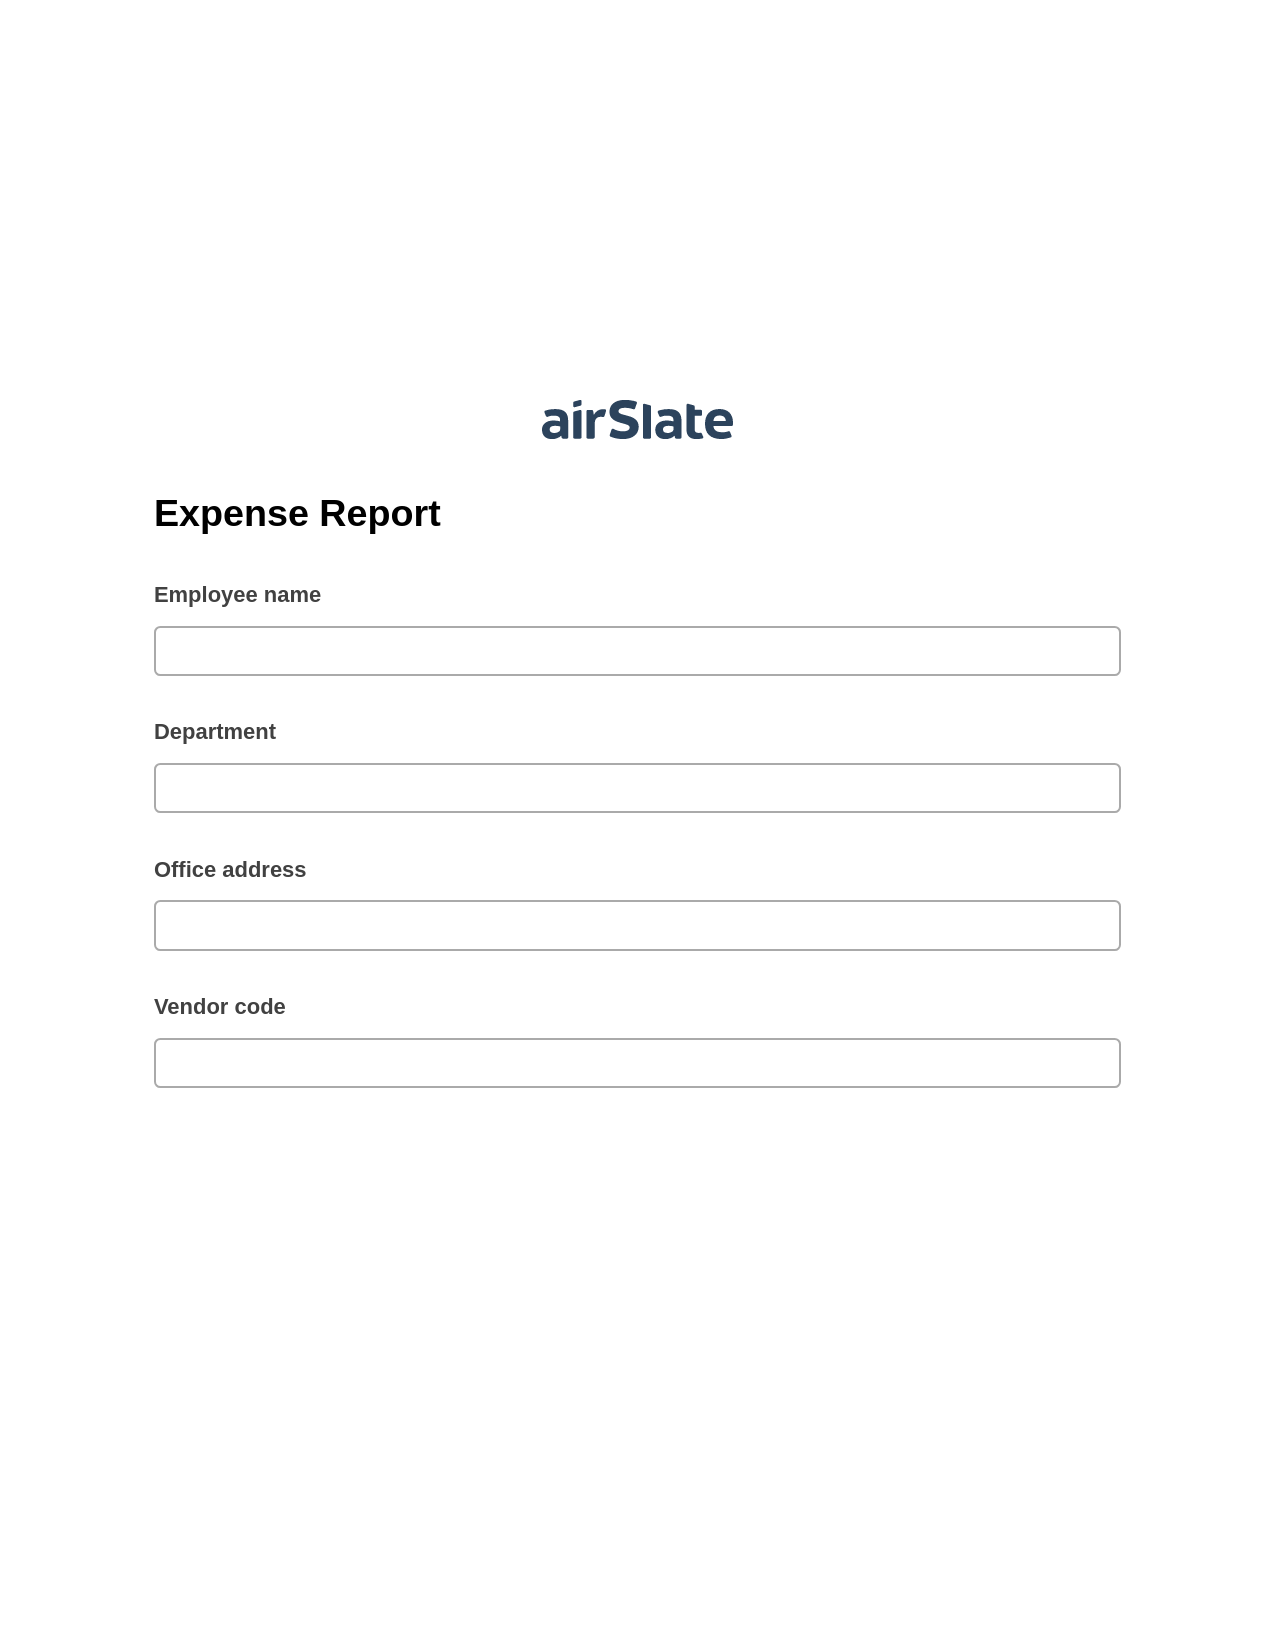 Multirole Expense Report Pre-fill from CSV File Bot, Set Signature Type Bot, Export to NetSuite Record Bot